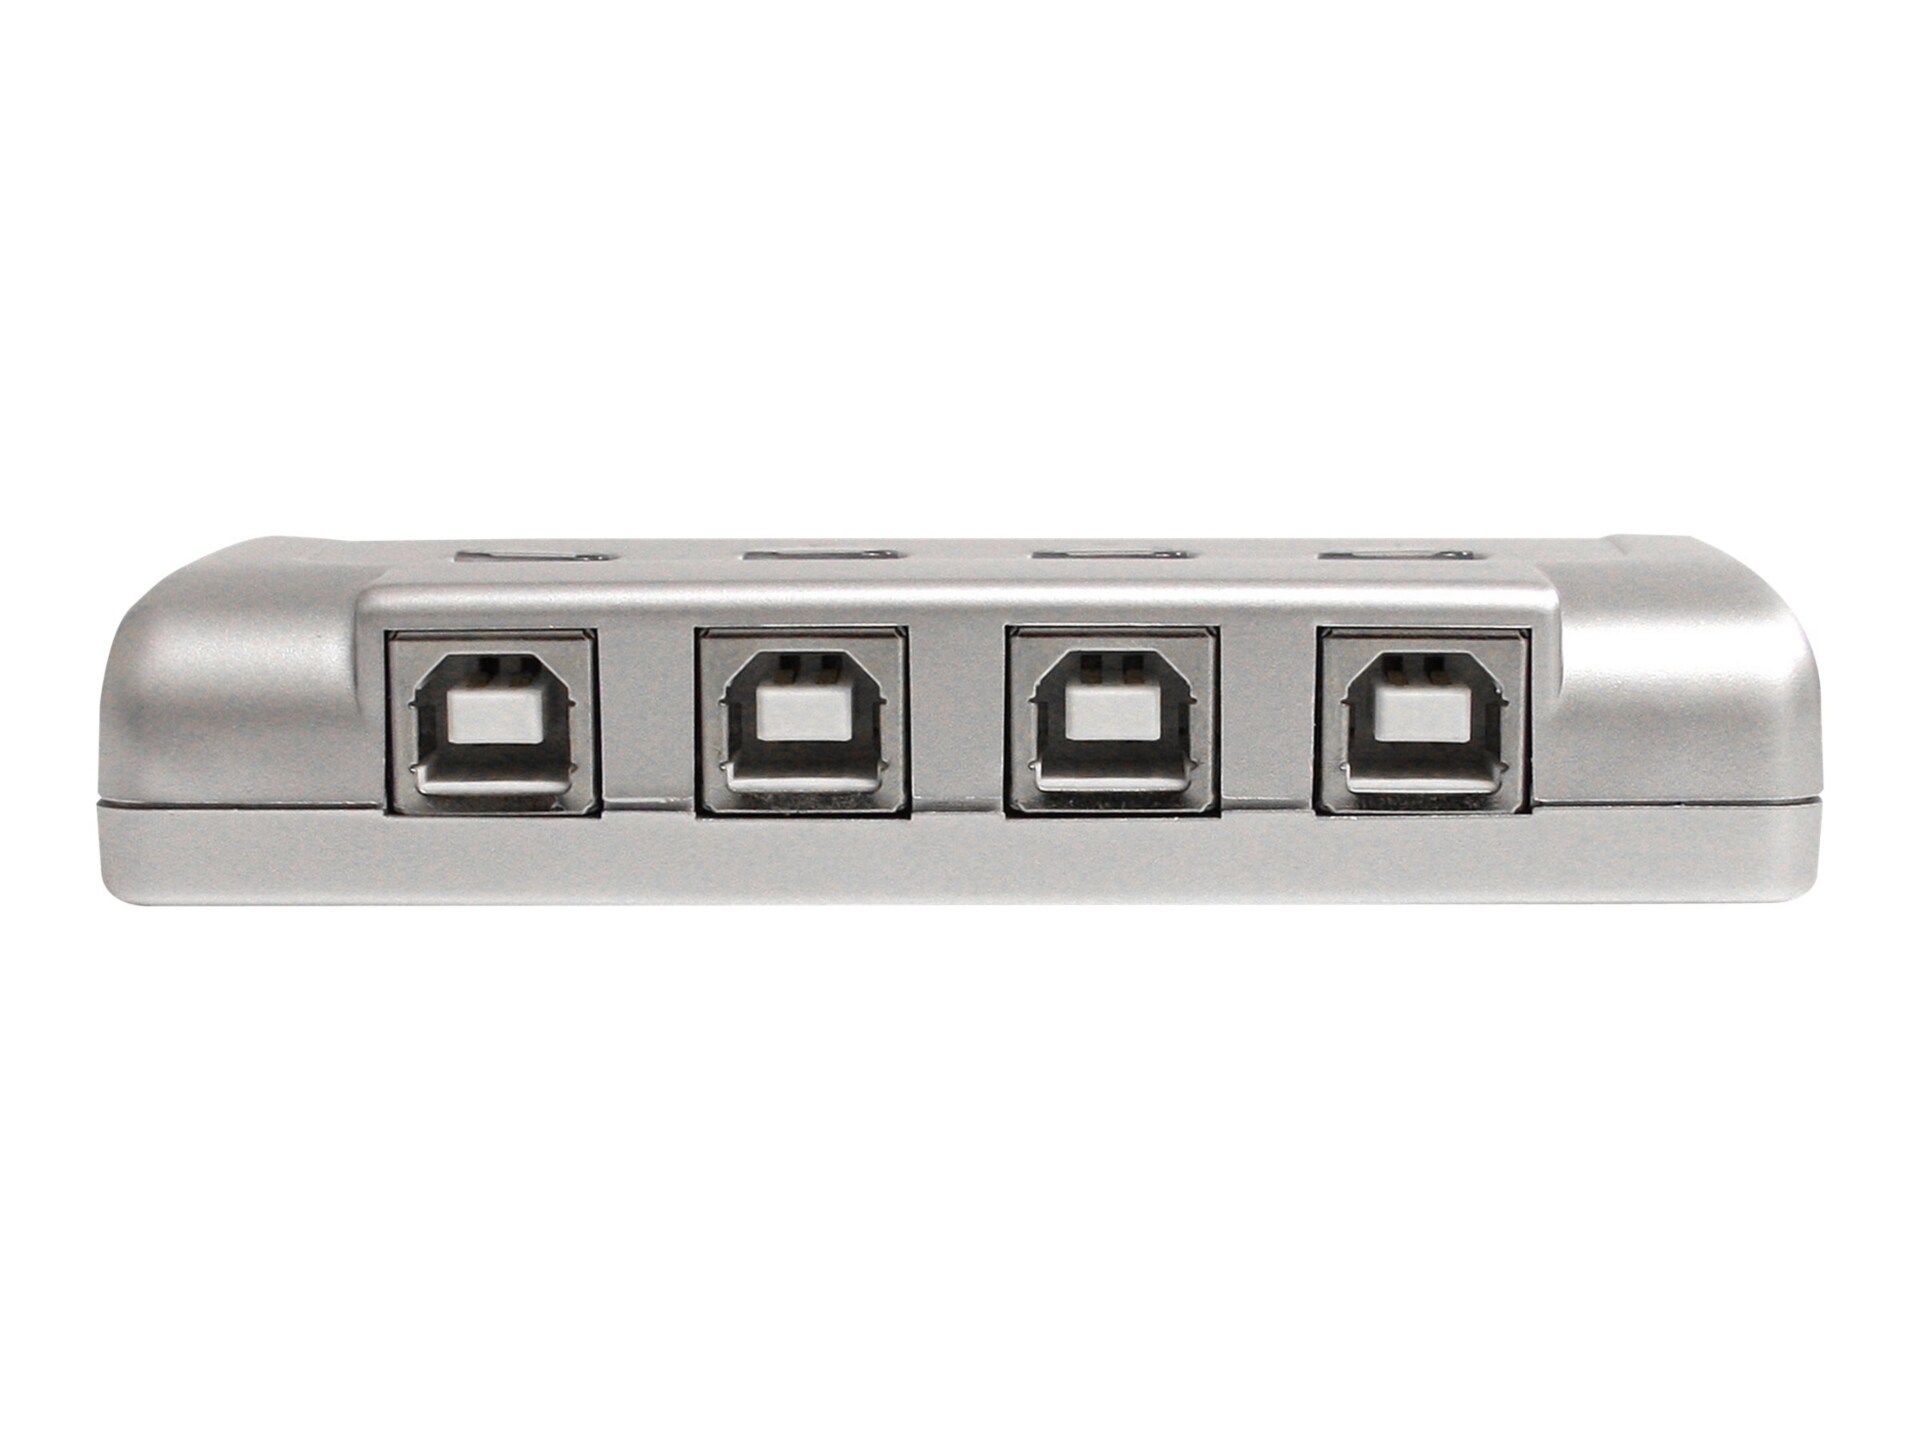 StarTech.com 4-to-1 USB 2.0 Peripheral Sharing Switch